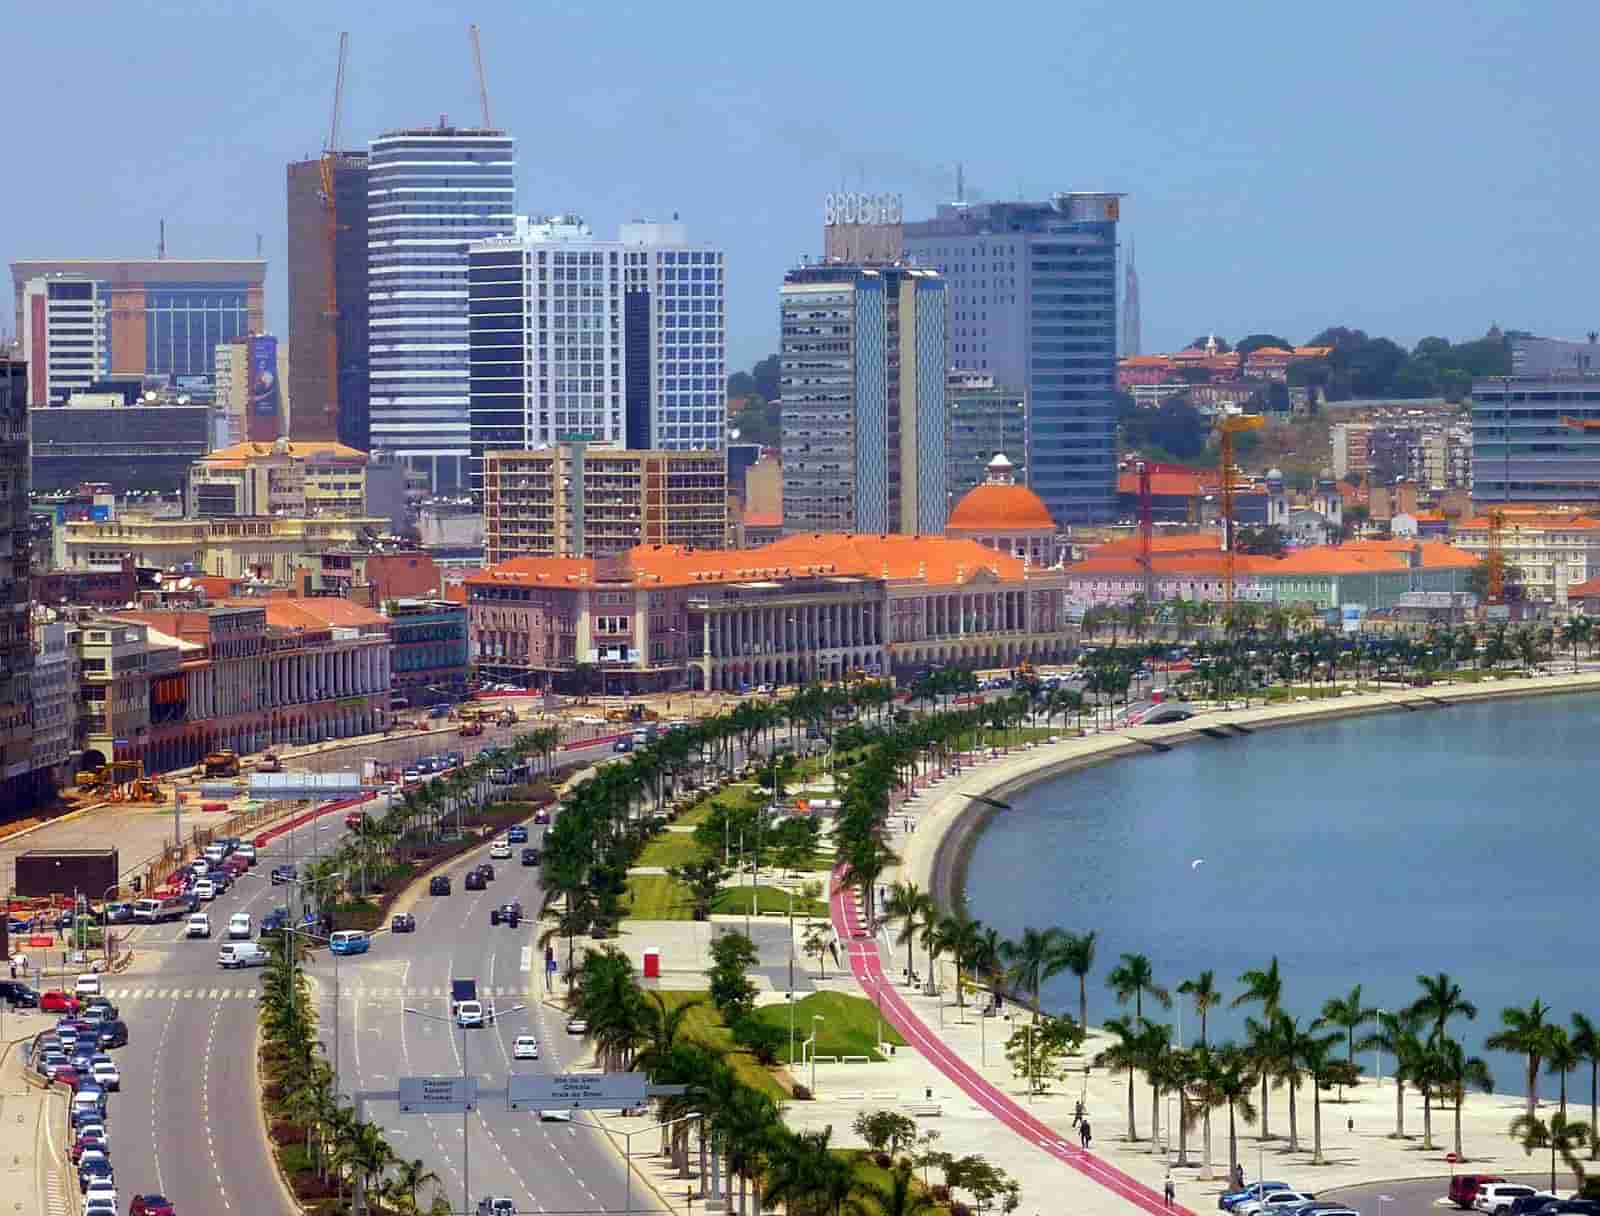 The 8 most beautiful cities in Africa [ARTICLE] - Pulse Nigeria